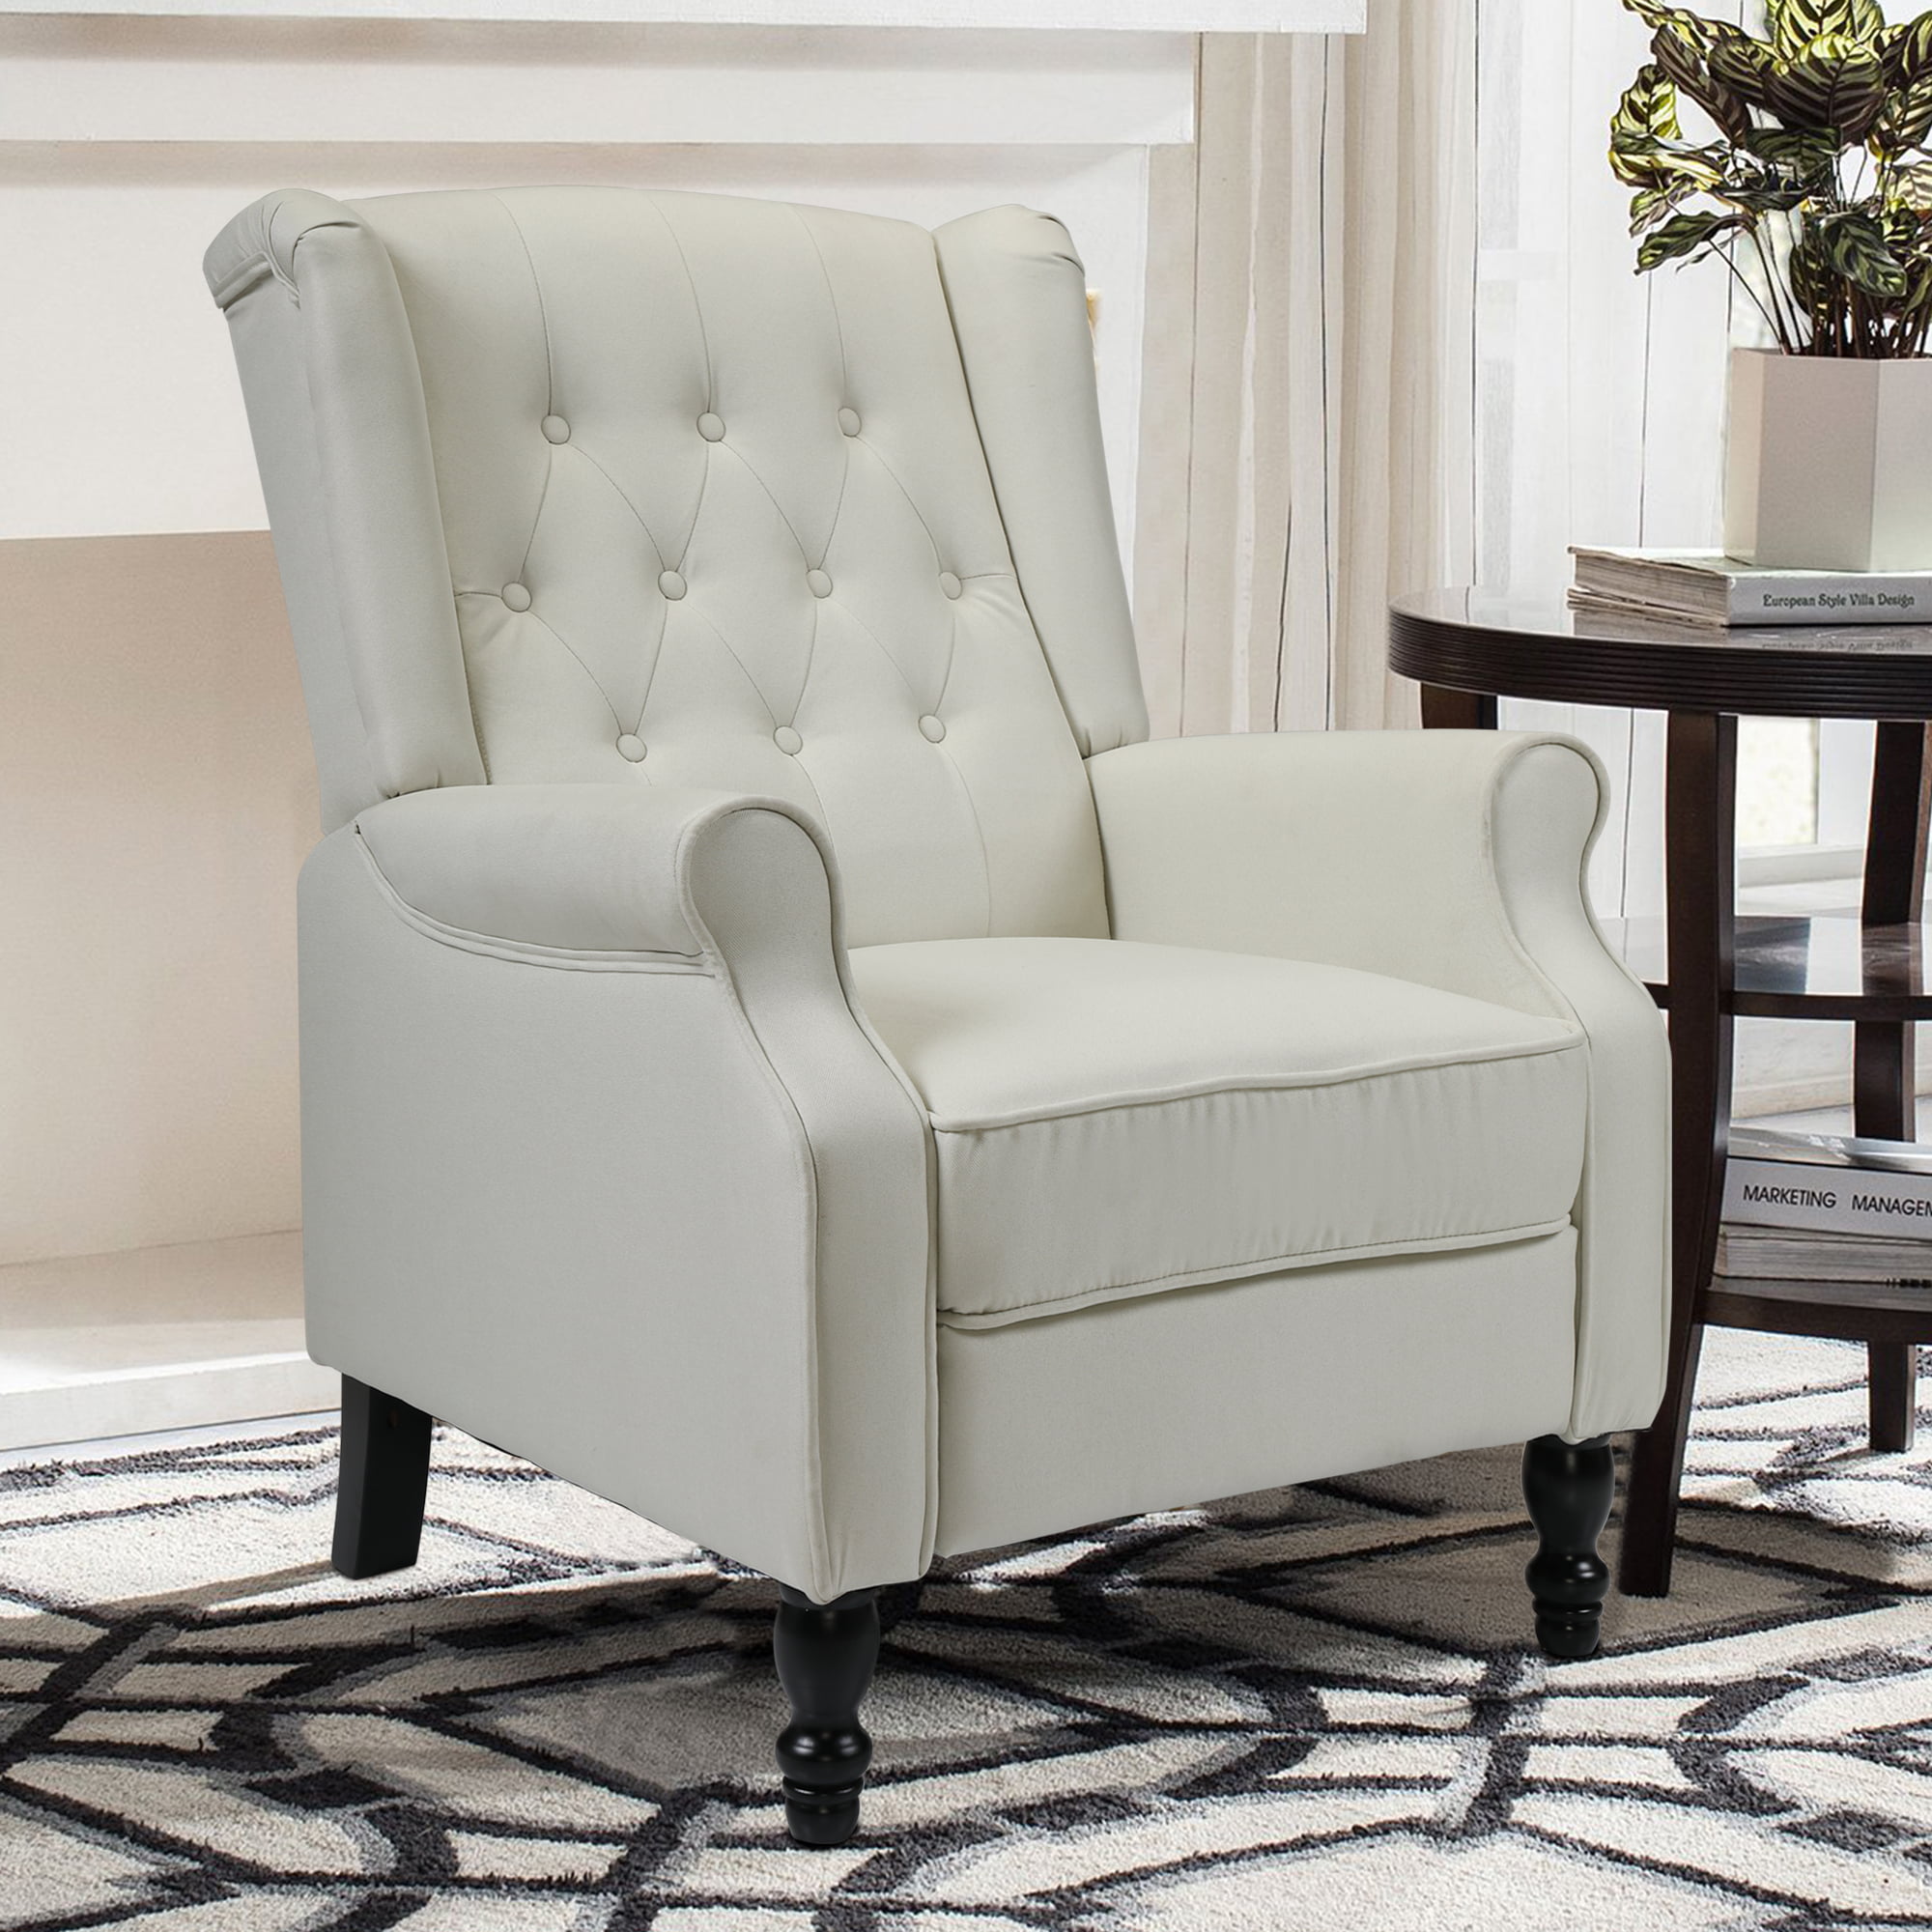 Jaxpety Tufted Accent Chair w/Upholstered Wingback Padded Seat Pushback Recliner Armchair for